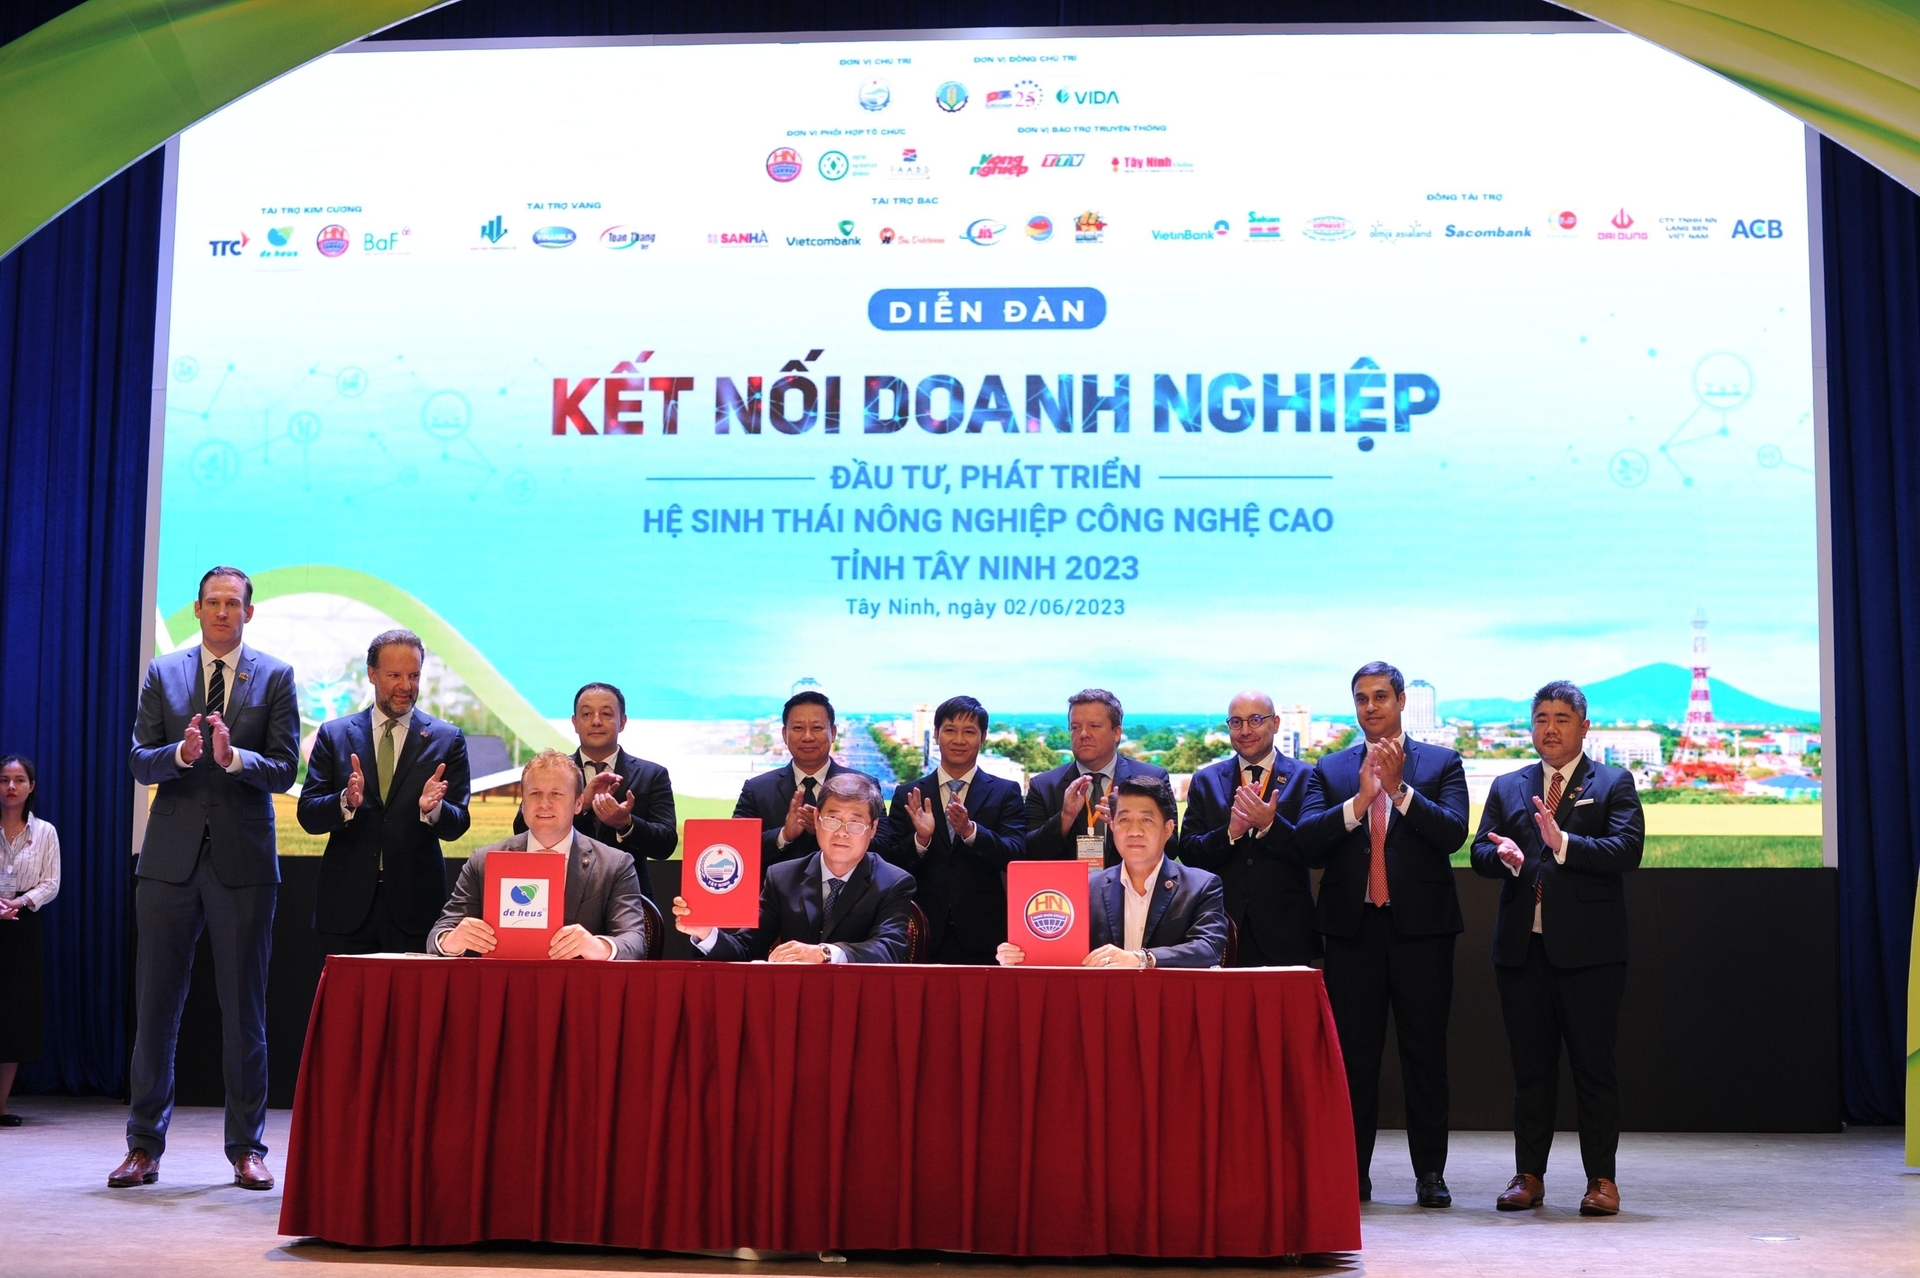 Tay Ninh Provincial People's Committee, De Heus Group (Netherlands) and Hung Nhon Group, signed a Memorandum of Understanding (MoU) on surveying, researching and investing in a number of agricultural projects and high-tech applications in Tay Ninh province.